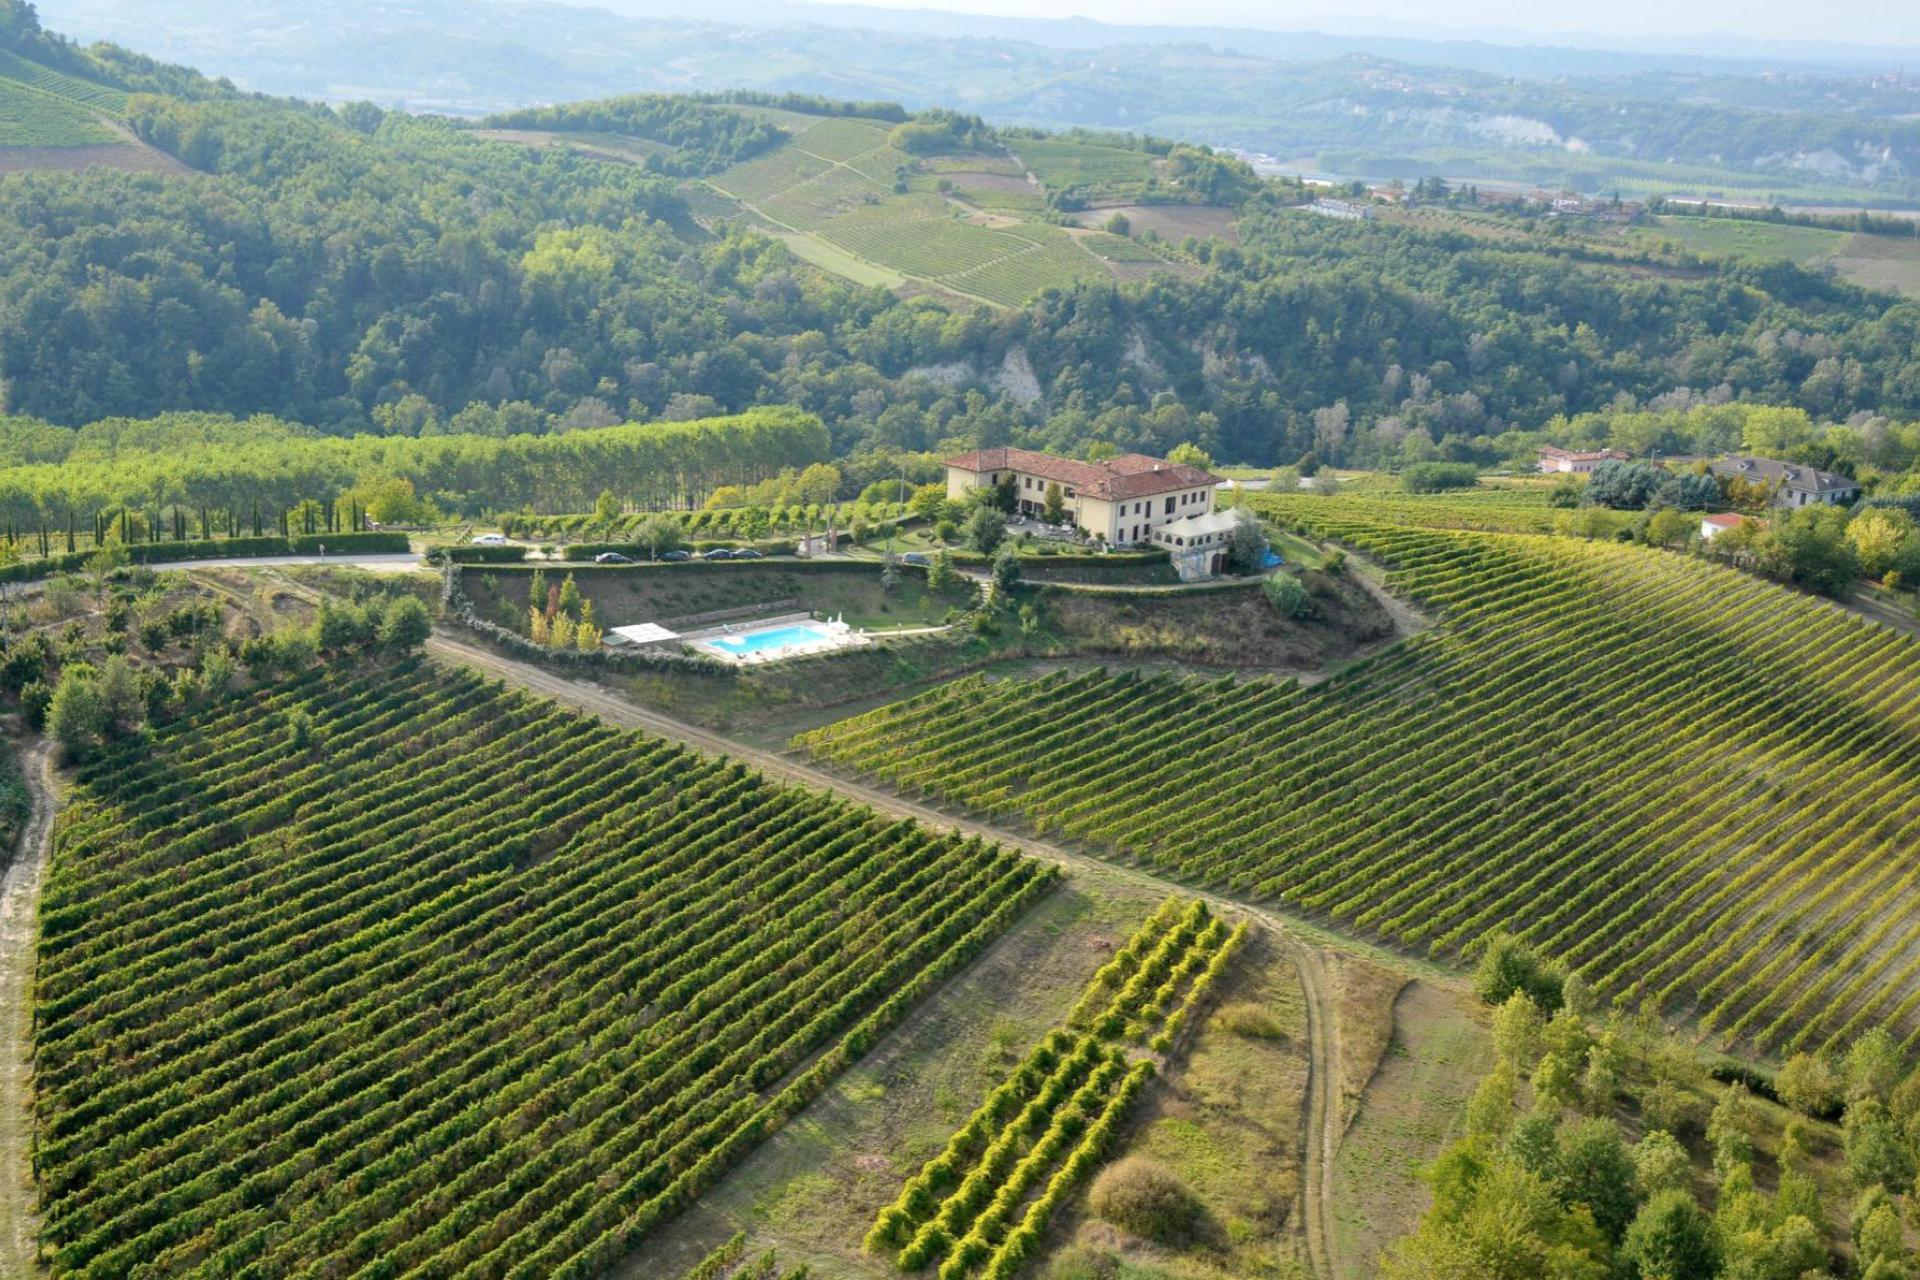 Agriturismo Piedmont Agriturismo Piemont for lovers of great wines